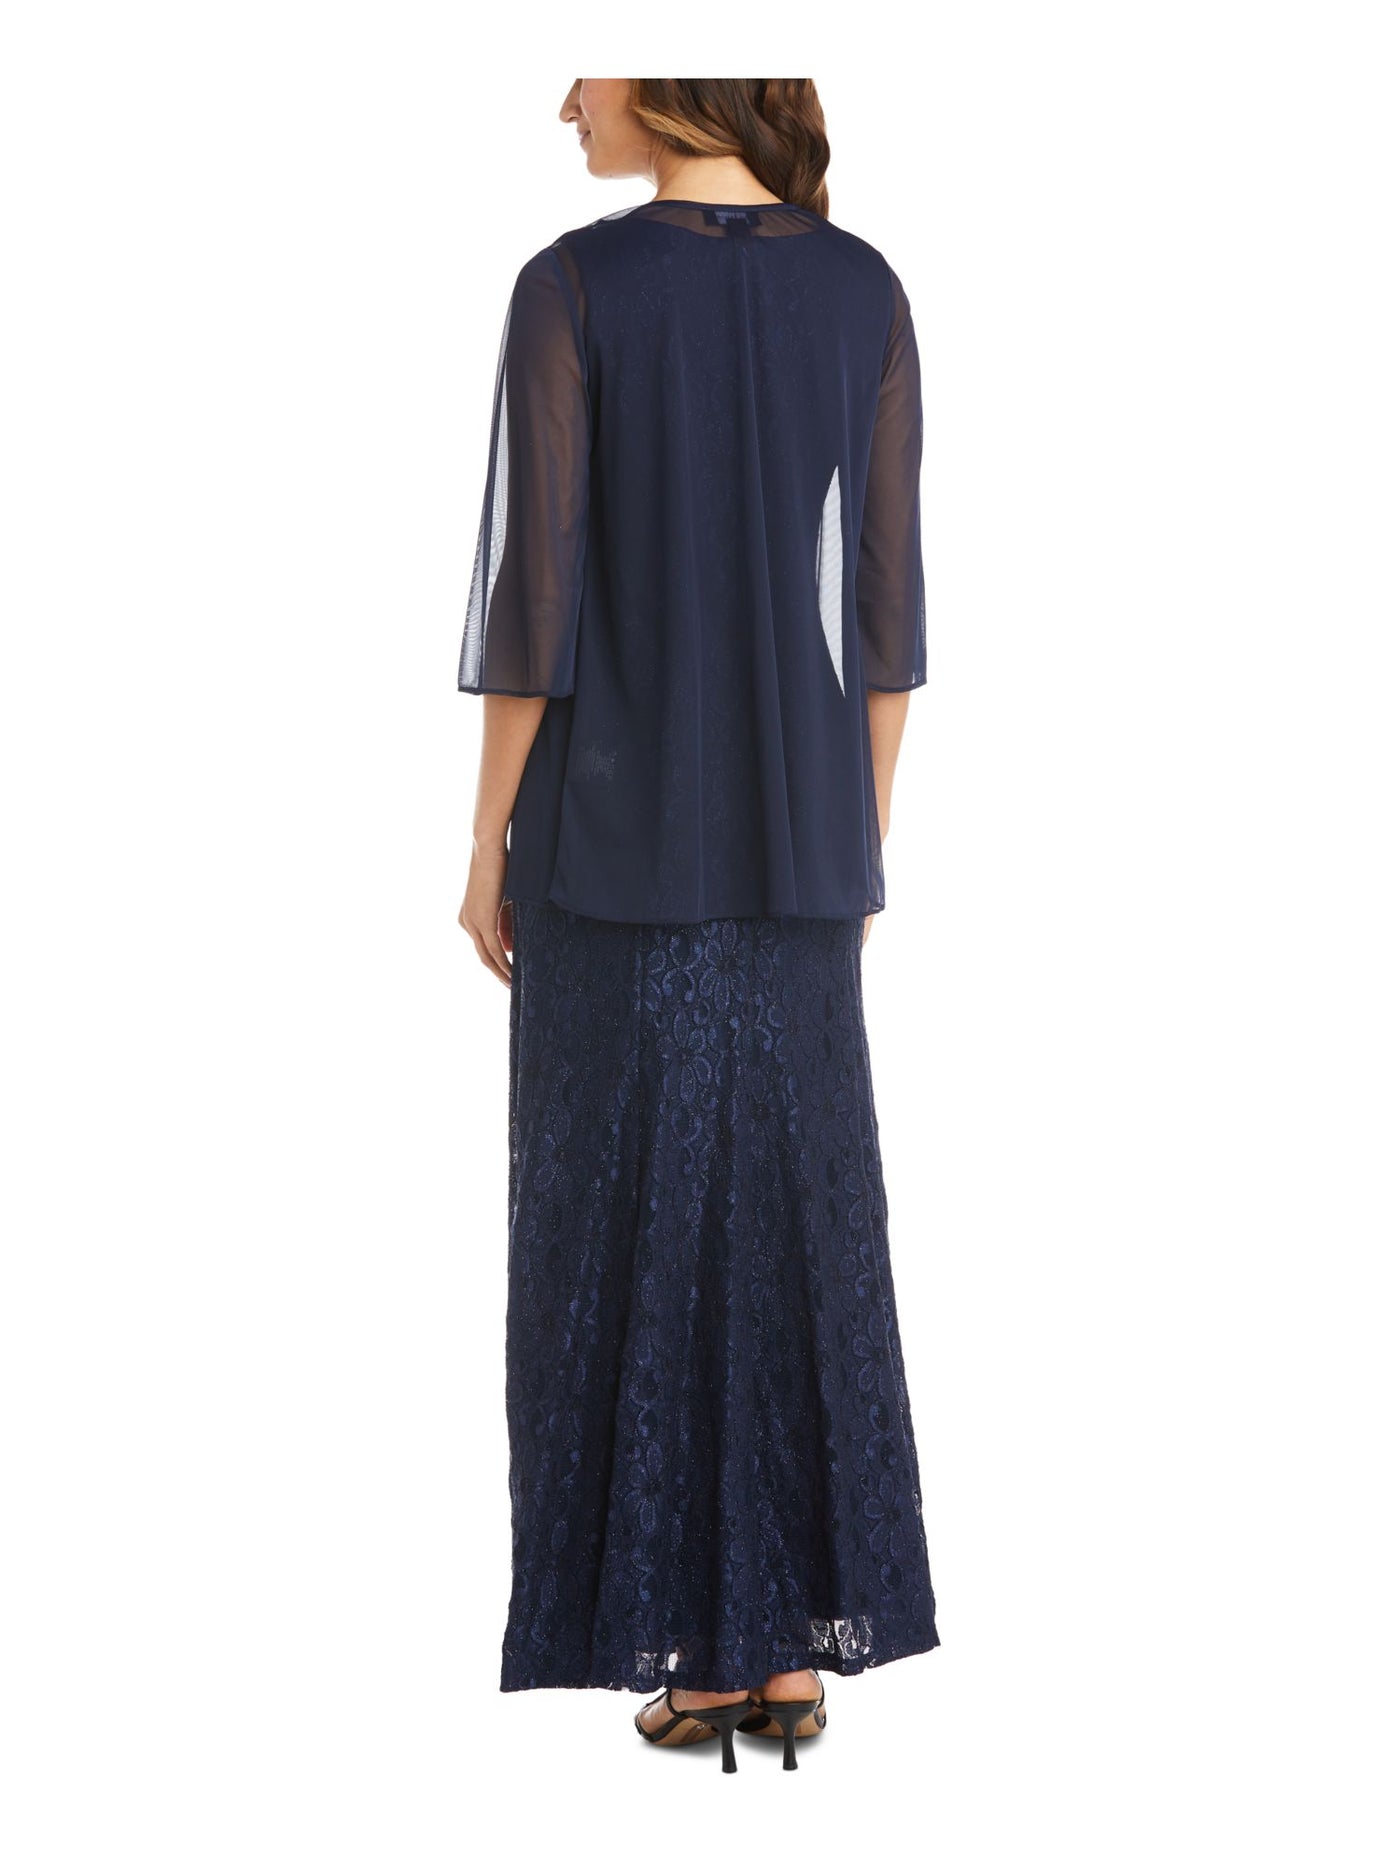 R&M RICHARDS Womens Navy Lace Embellished Glitter 3/4 Sheer Jacket Floral Sleeveless Scoop Neck Maxi Evening Gown Dress 6